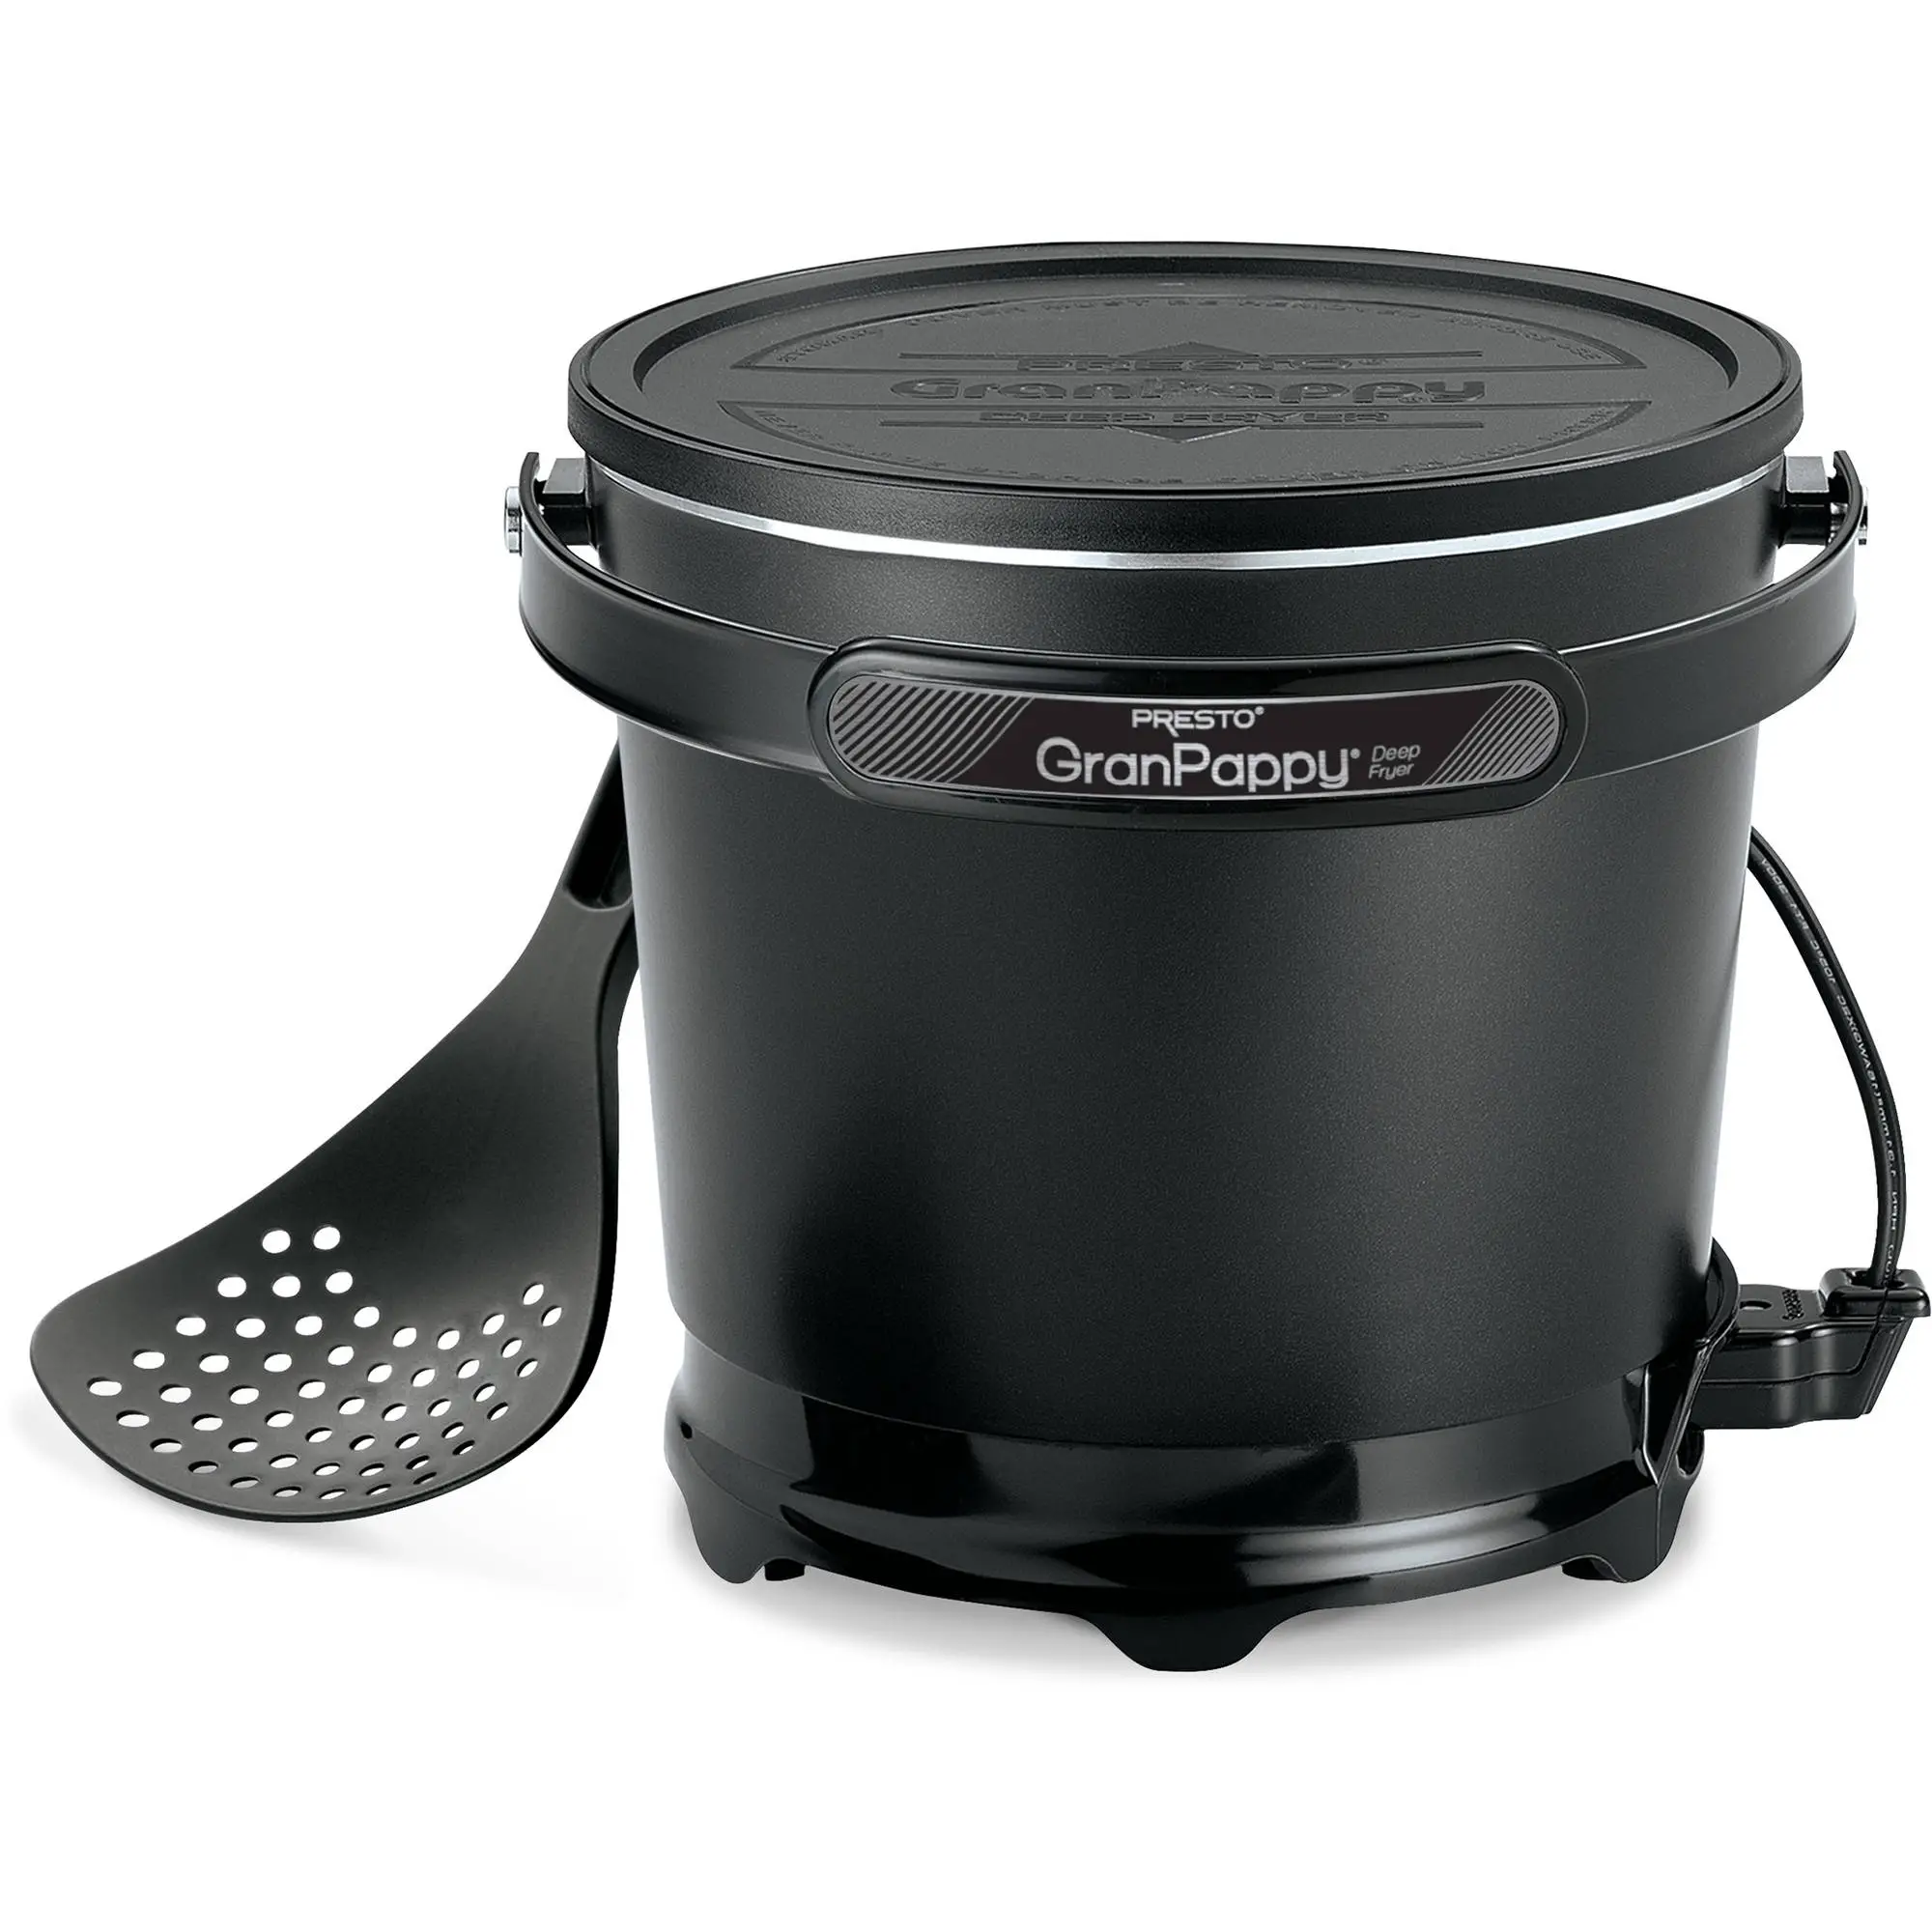 Presto 05411 GranPappy is one of the best presto deep fryer with cool touch handle, lid and a spoon.